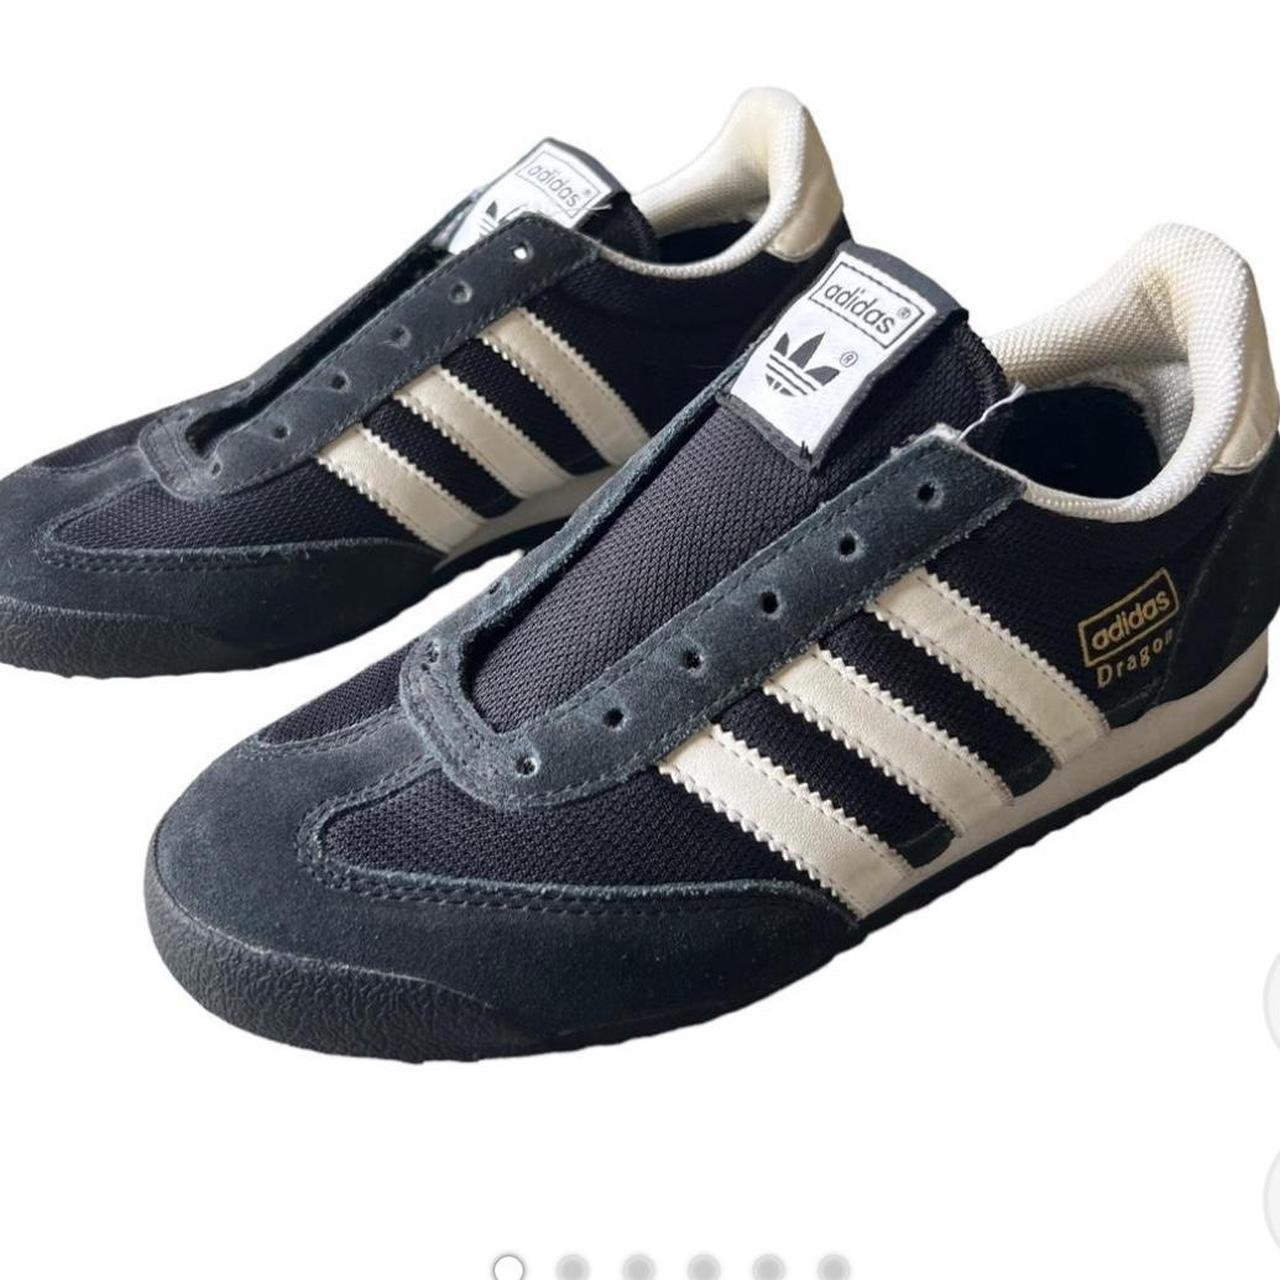 REPOP! I bought actual sambas so I don’t need these... - Depop